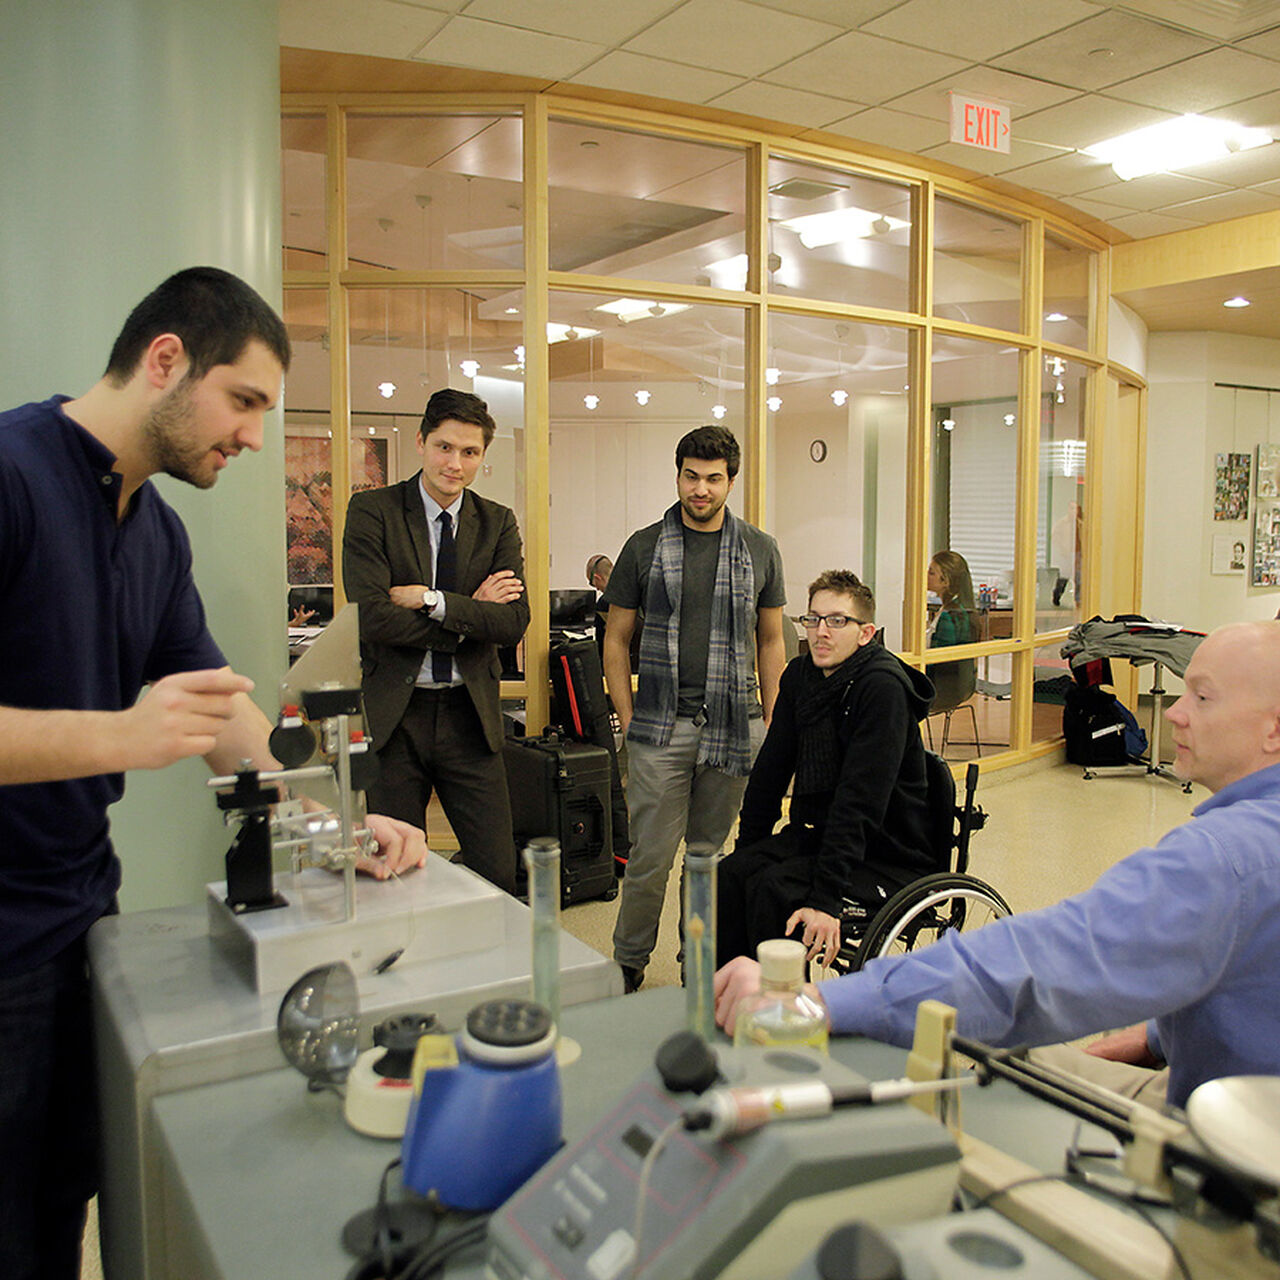 Spinal cord researcher talking with community members image number 0